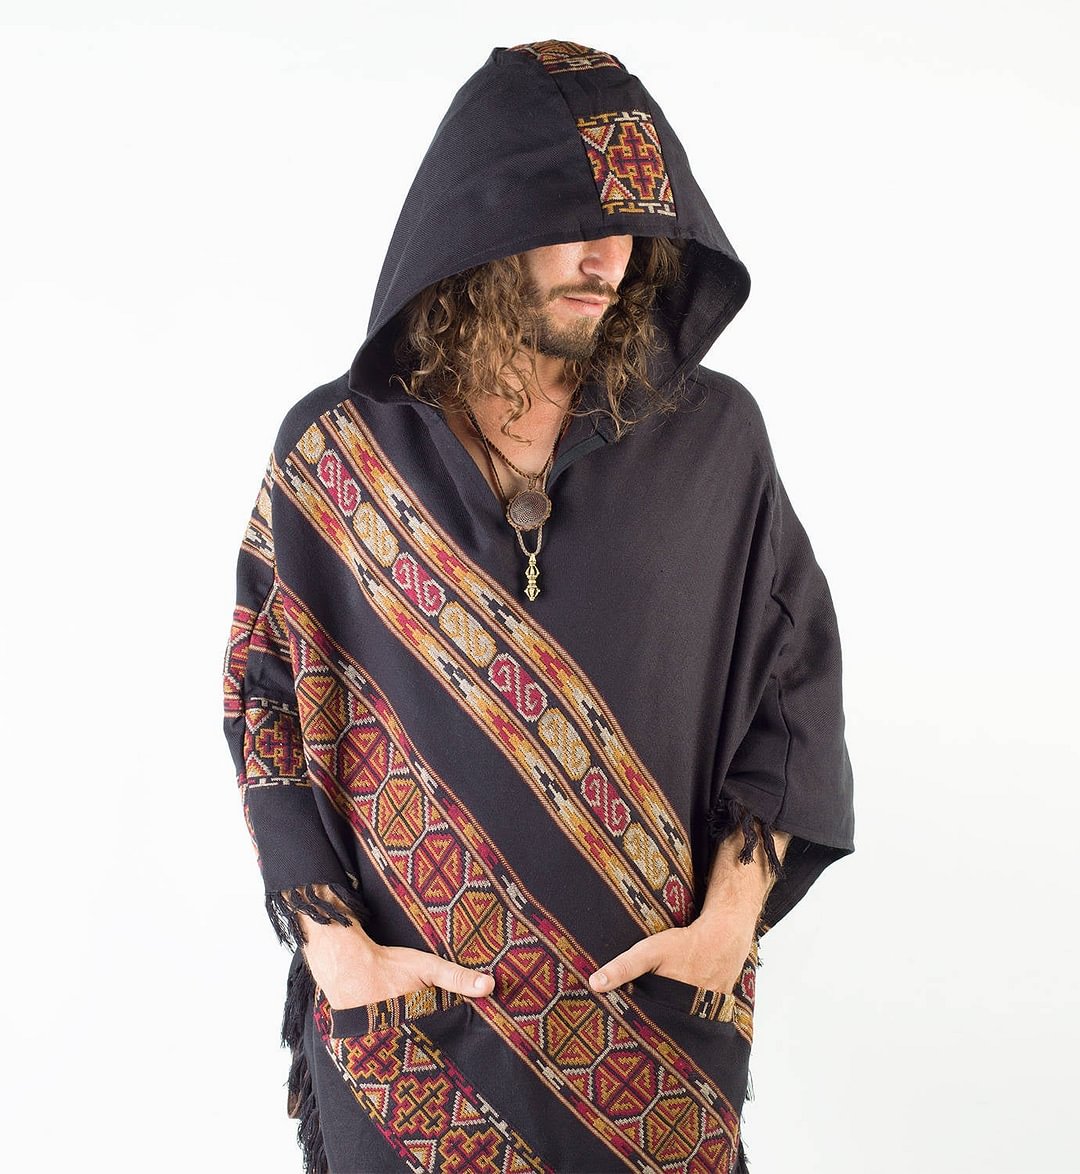 Black Wool Poncho With Hood Tribal Embroidery Celtic Patterns Gypsy Alternative Wild Festival Rave Mexican Primitive   Shawl